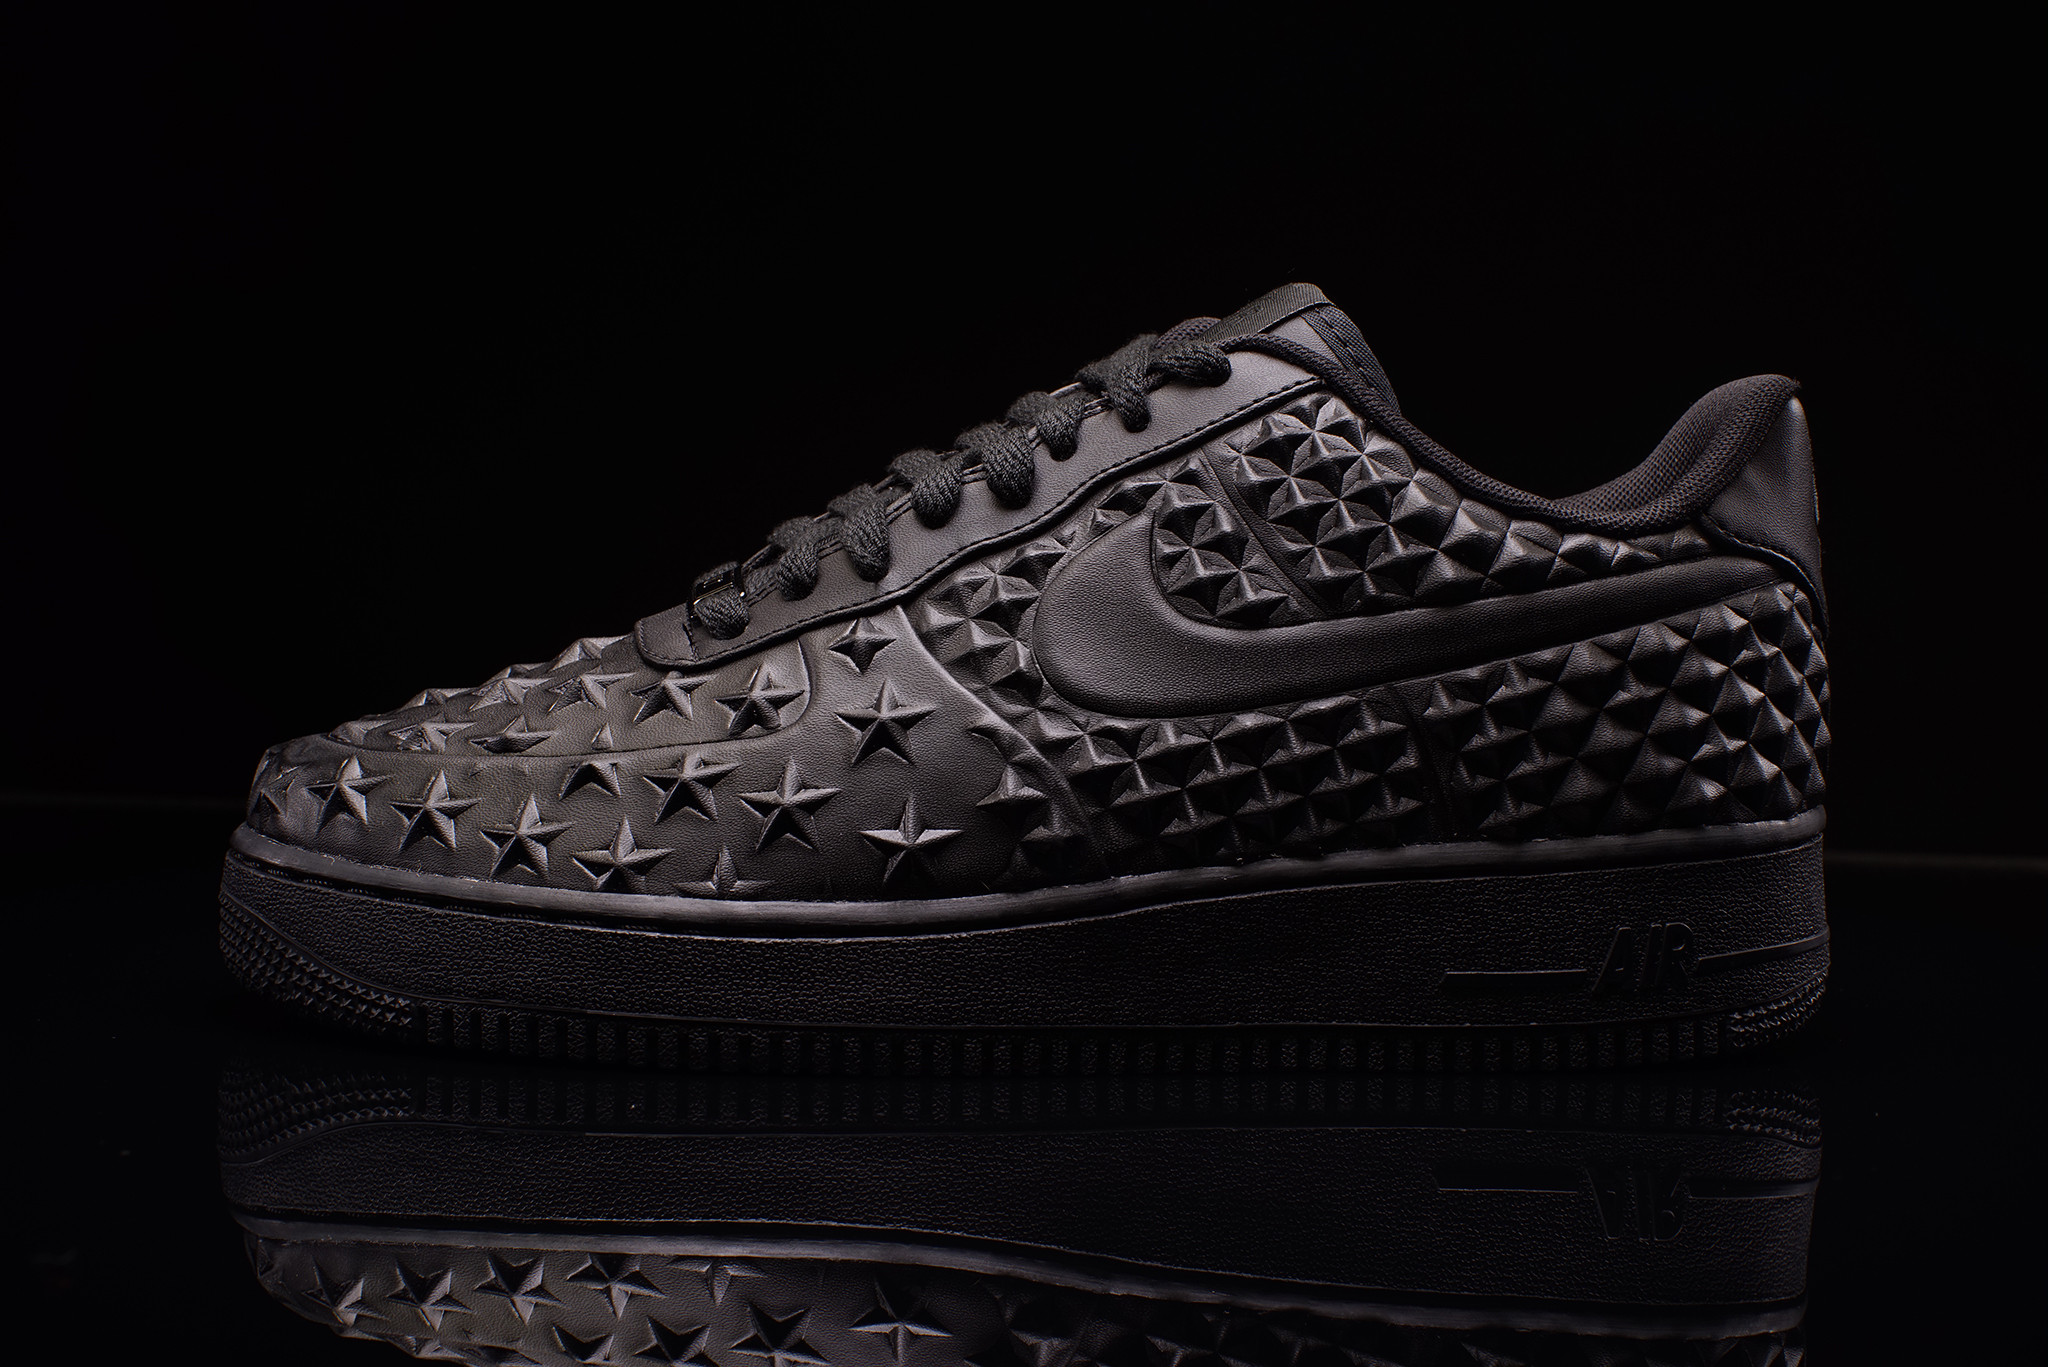 Nike Air Force 1 LV8 VT Black Available | SNEAKERS ADDICT